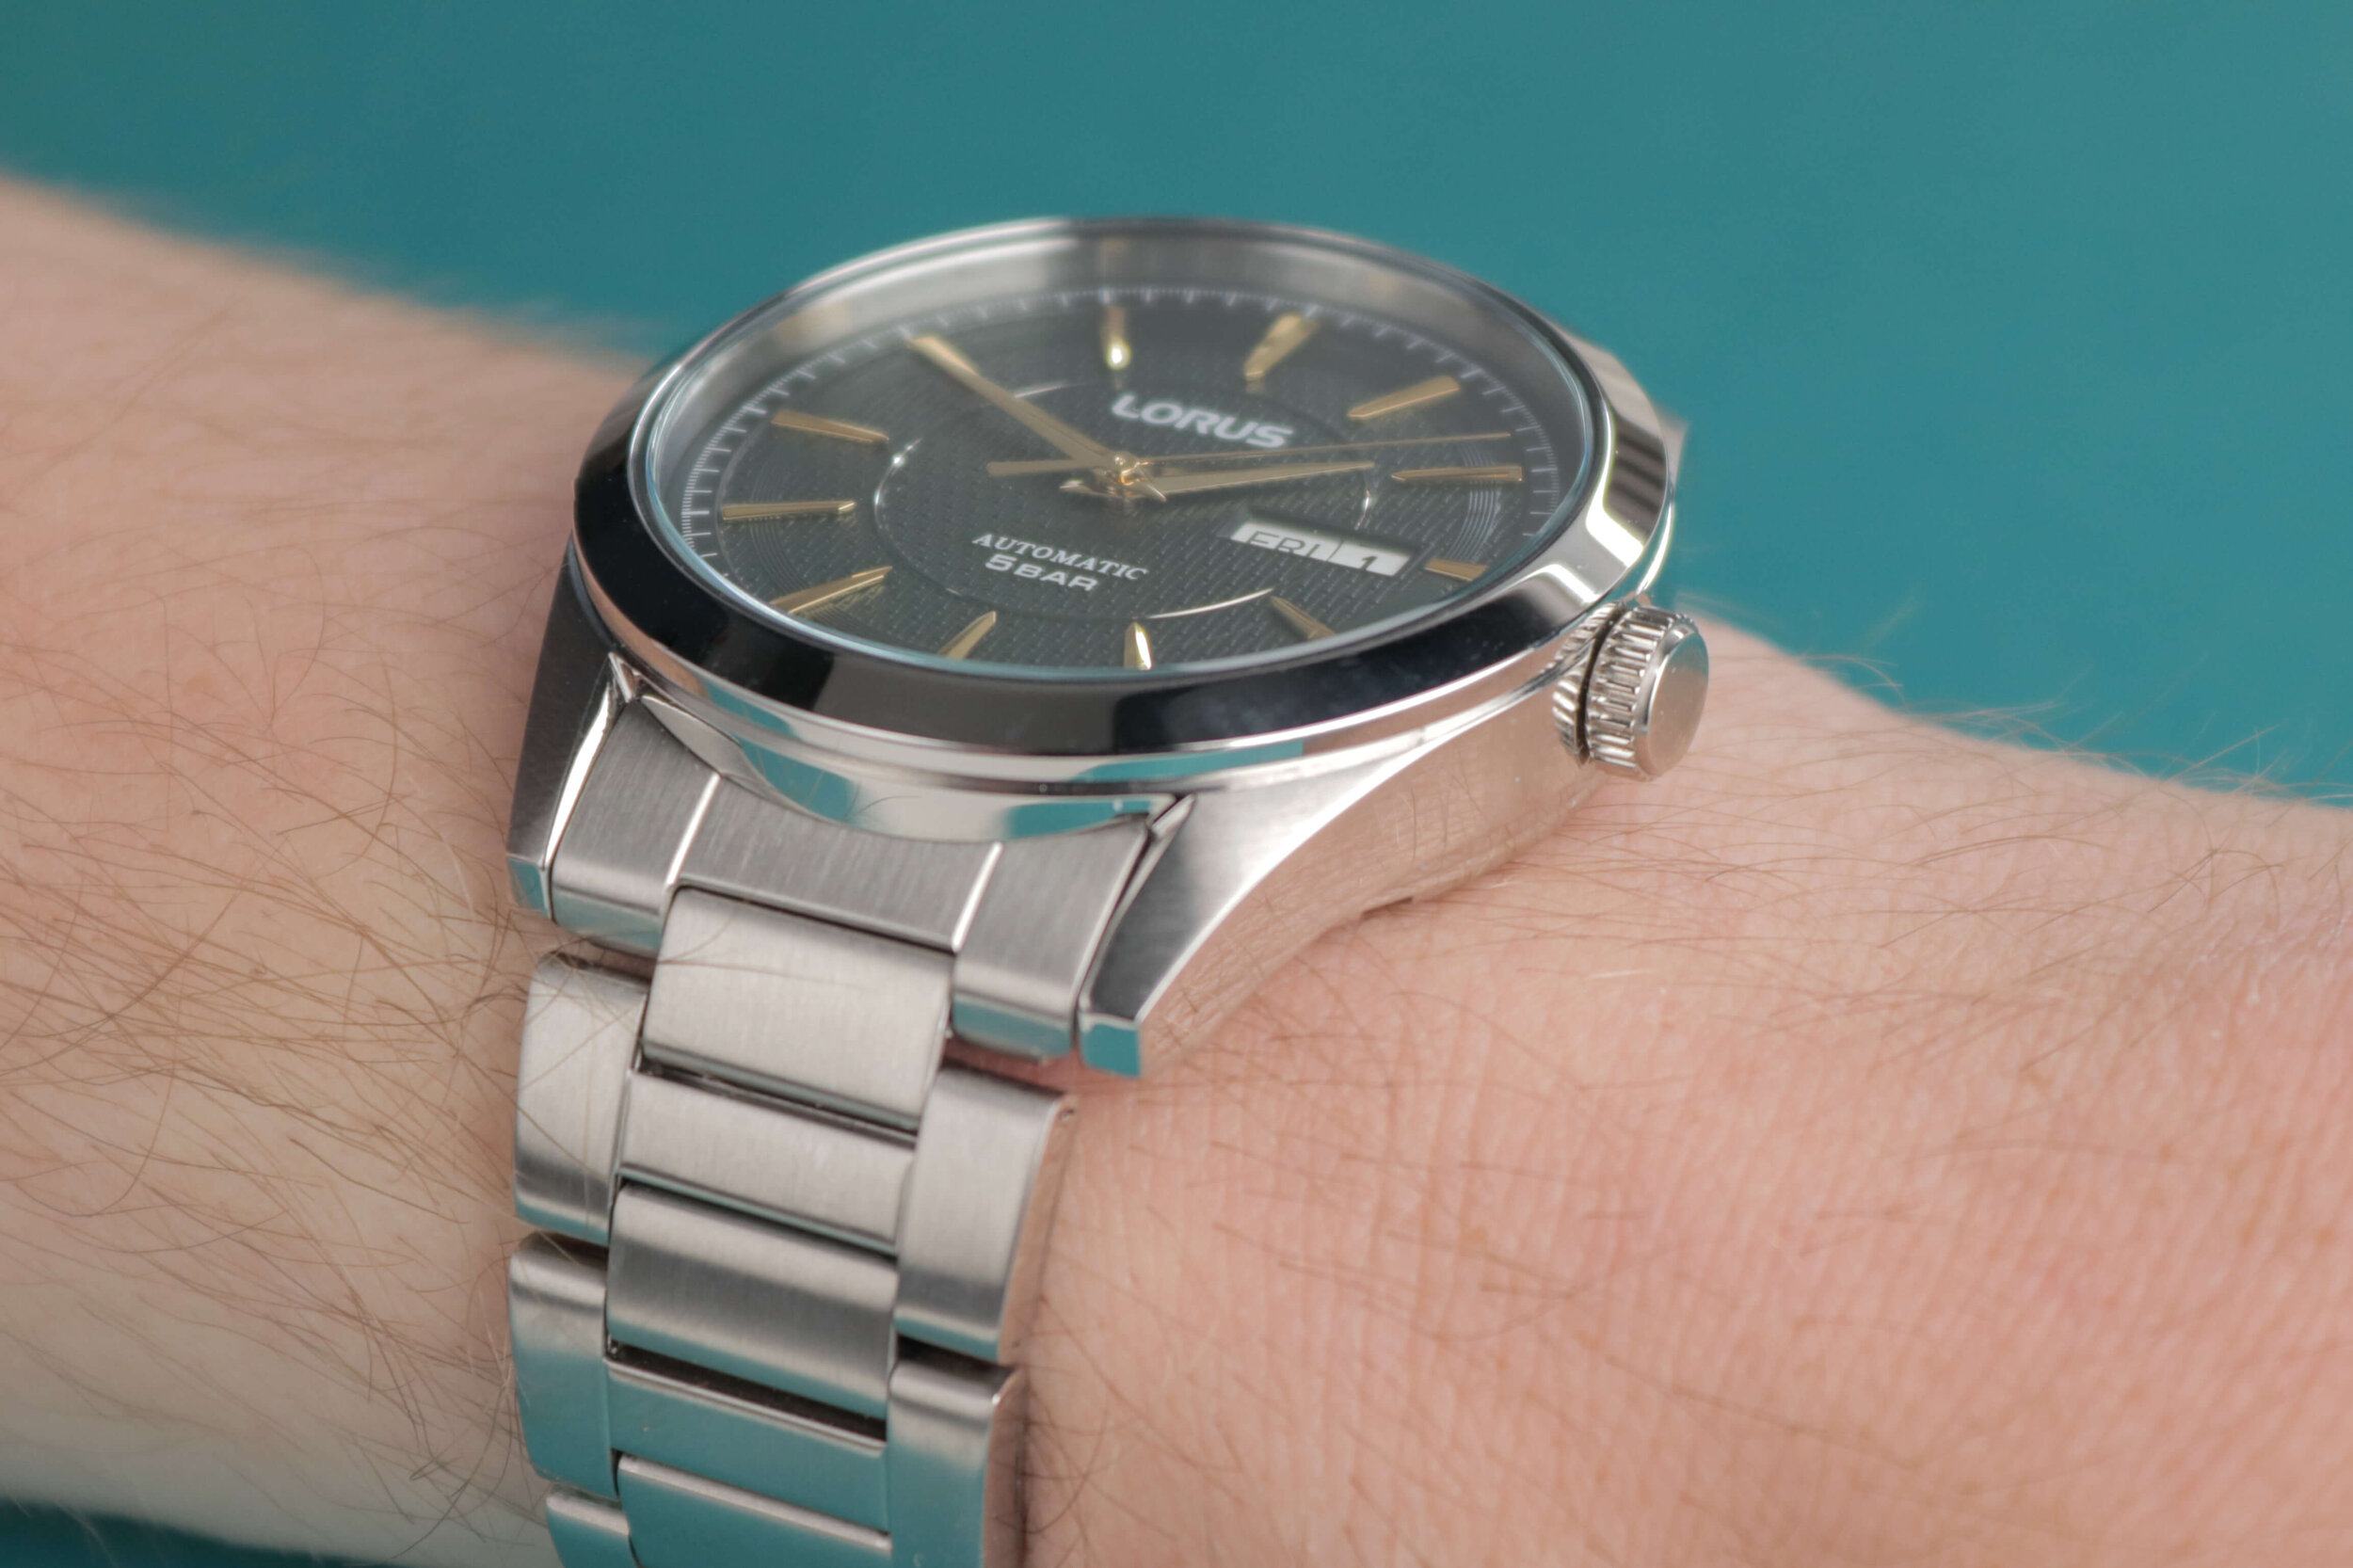 Gehoorzaam microscoop Adelaide Lorus Automatic Watch Review - This Is A Seiko 5, But Better? — Ben's Watch  Club